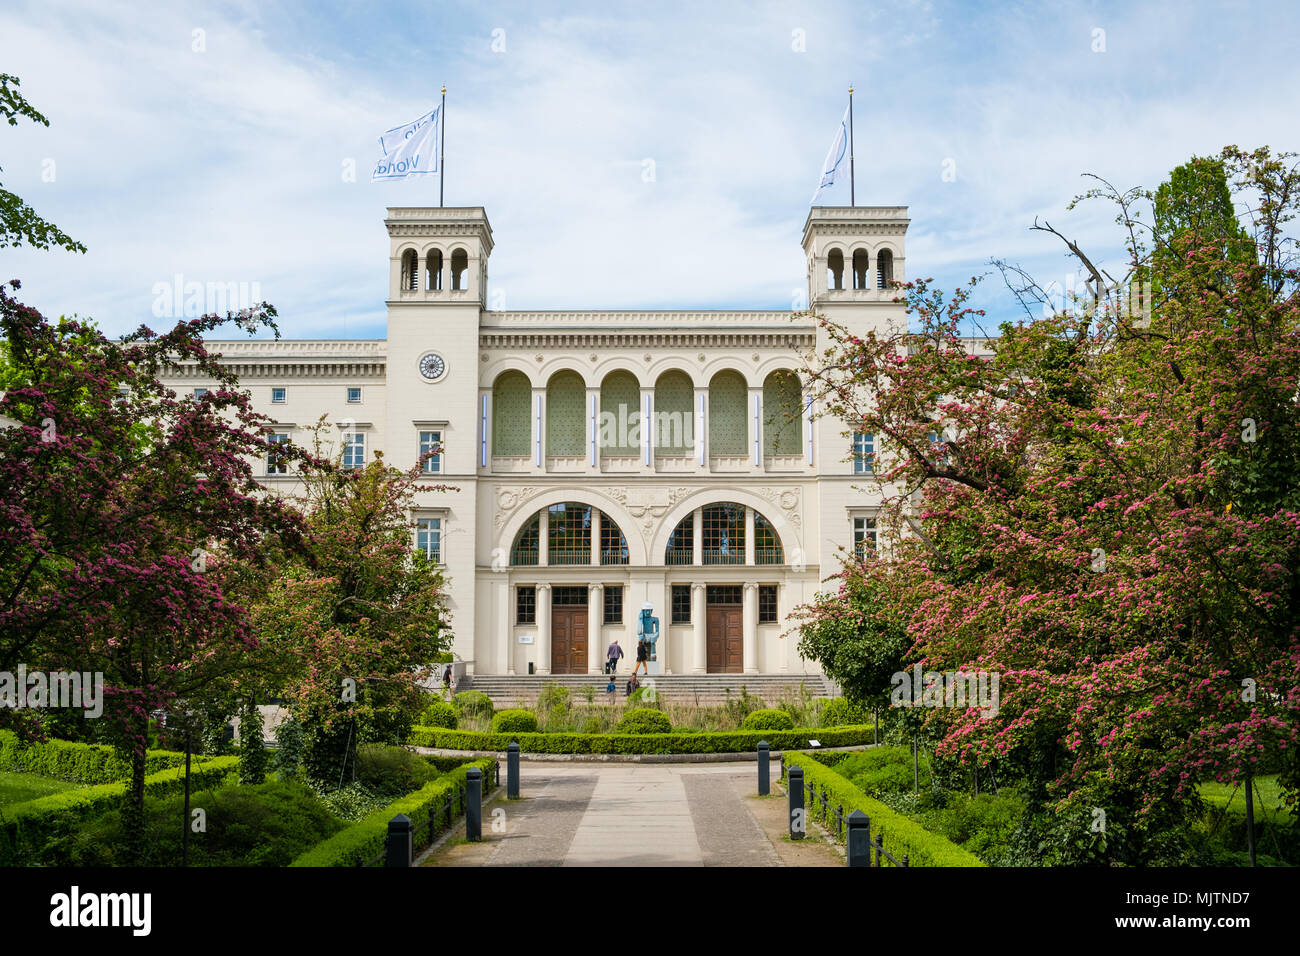 Berlin, Germany - may, 2018: The Hamburger Bahnhof former railway station now  the Museum fuer Gegenwart (Museum of the Present) in Berlin, Germany Stock Photo